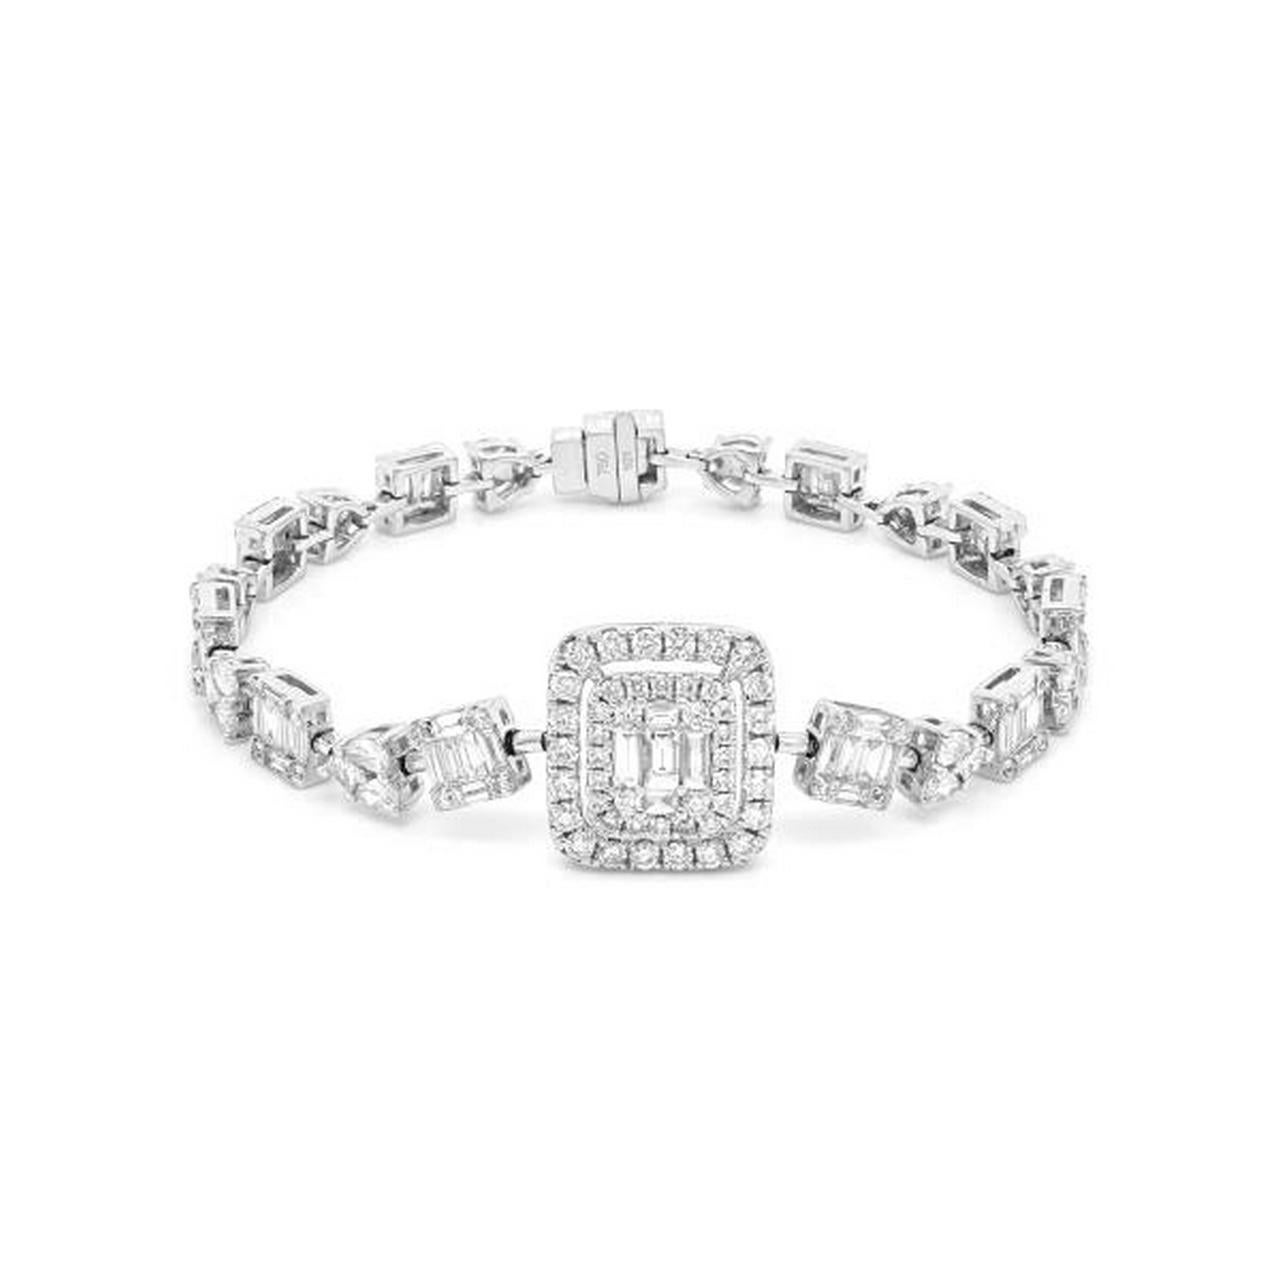 The Following Item we are offering is this Beautiful Rare Important 18KT White Gold Brilliant White Diamond Fancy Elaborate Baguette Diamond Bracelet. Bracelet is comprised of over 5CTS of Magnificent Rare Gorgeous Rare Fancy Glittering Diamonds!!!